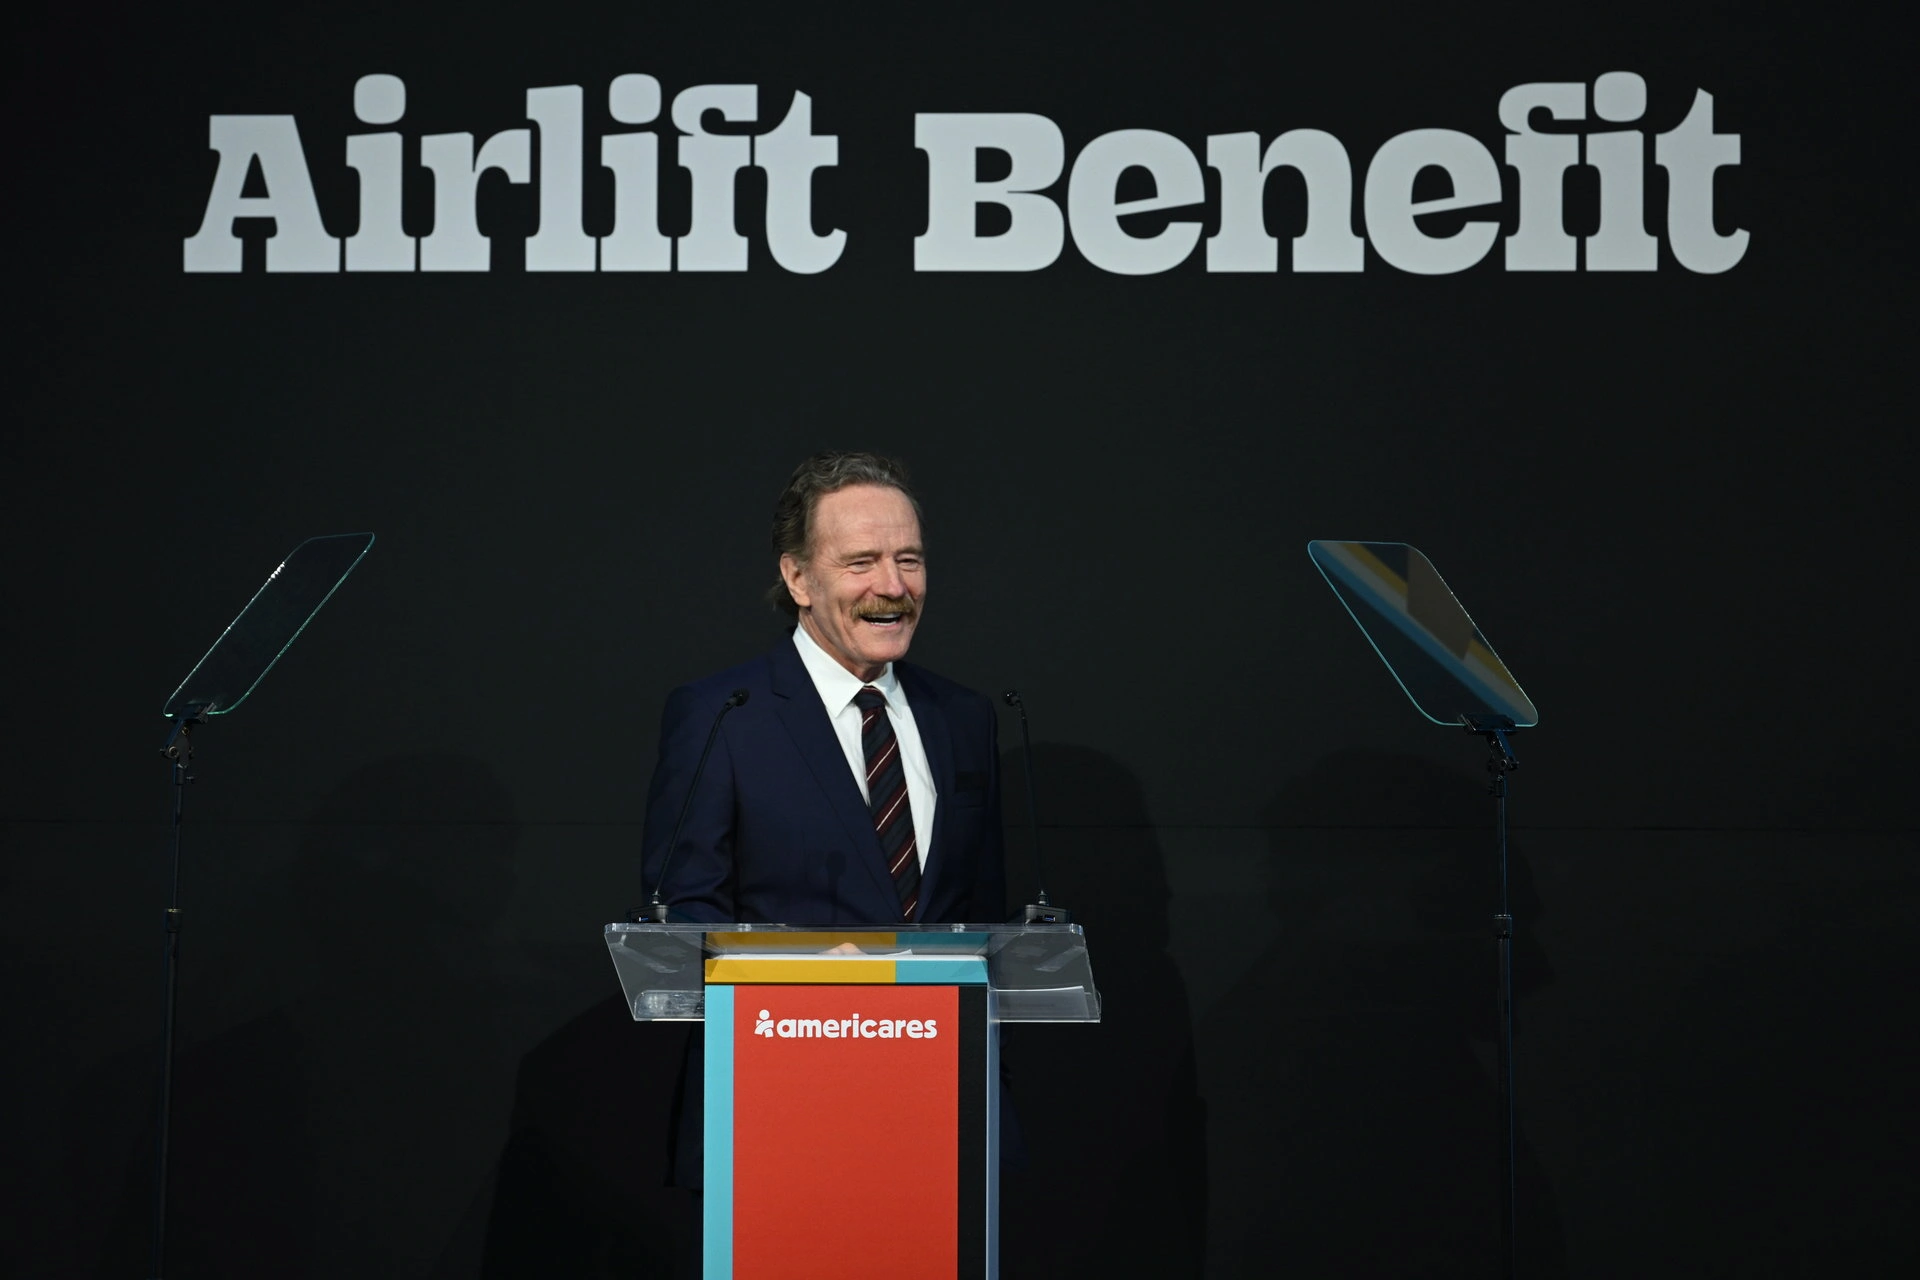 Master of Ceremonies Bryan Cranston on stage at the 2024 Americares Airlift Benefit. Photo by Bryan Bedder/Getty Images for Americares.